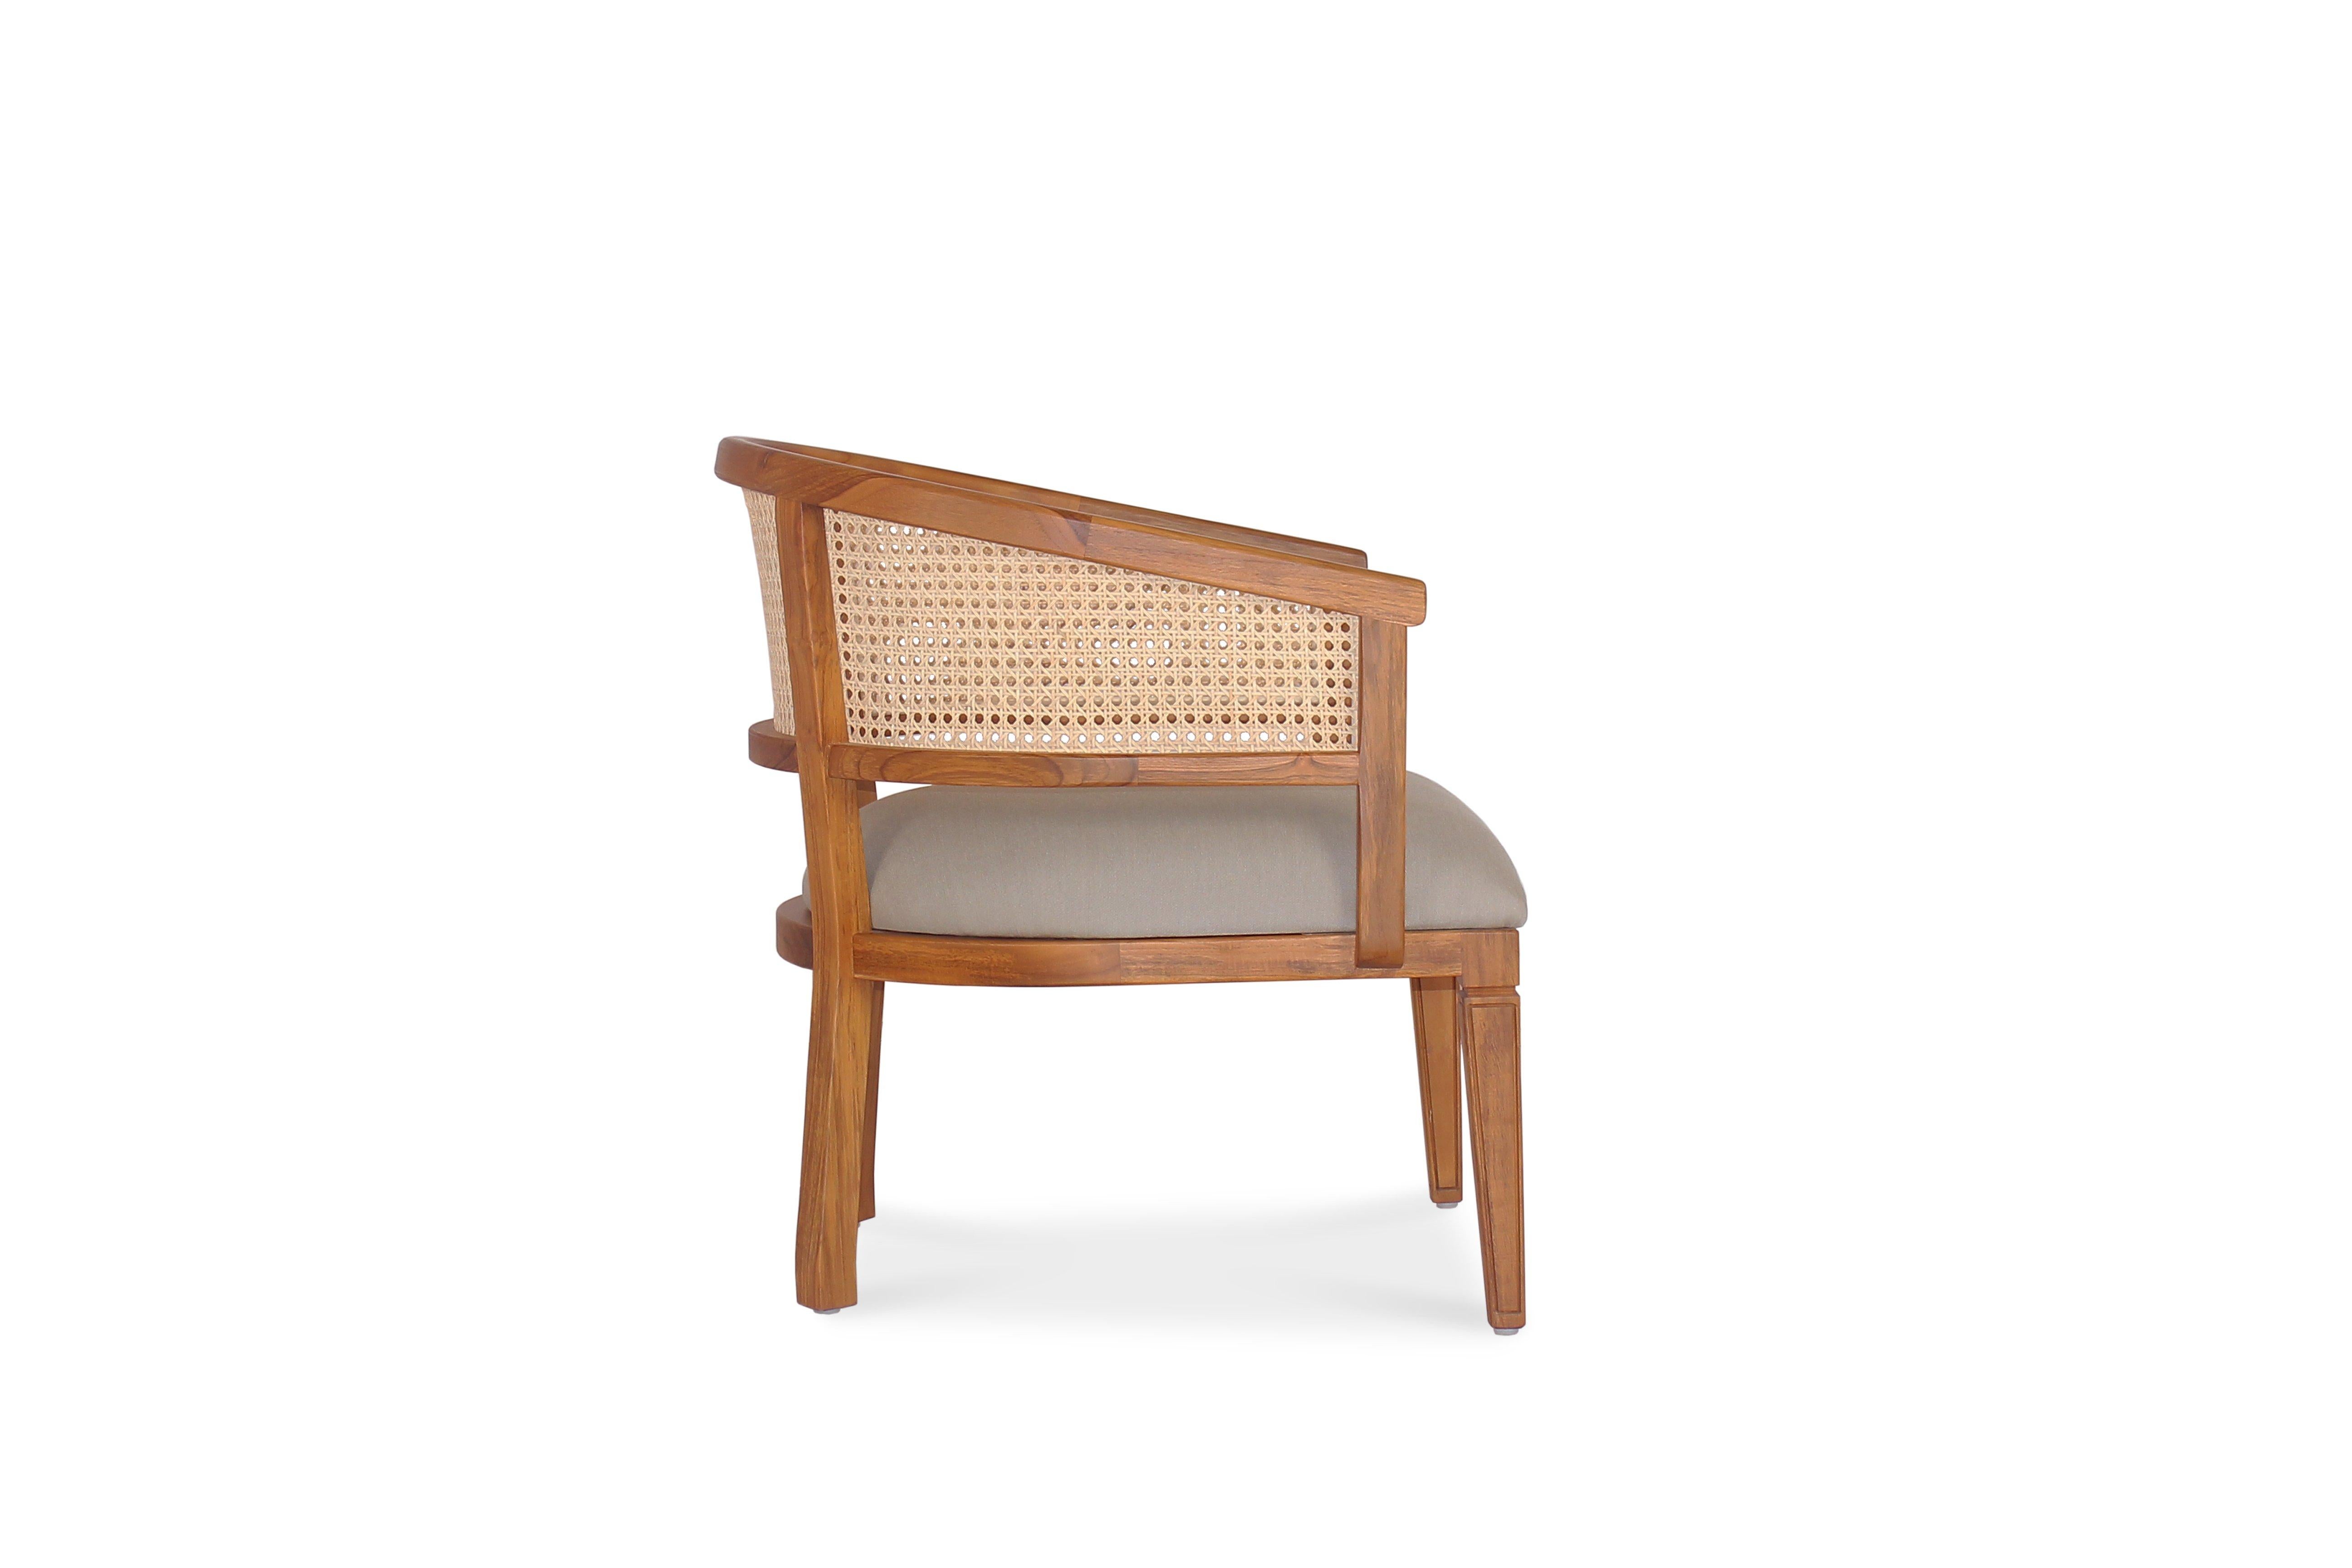 Anais is a premium class lounge chair made from the highest quality craftsmanship and is a throwback to a style of furniture from a hundred years ago that has inspired much of the Nestify philosophy. If you like the style of Singapore's 